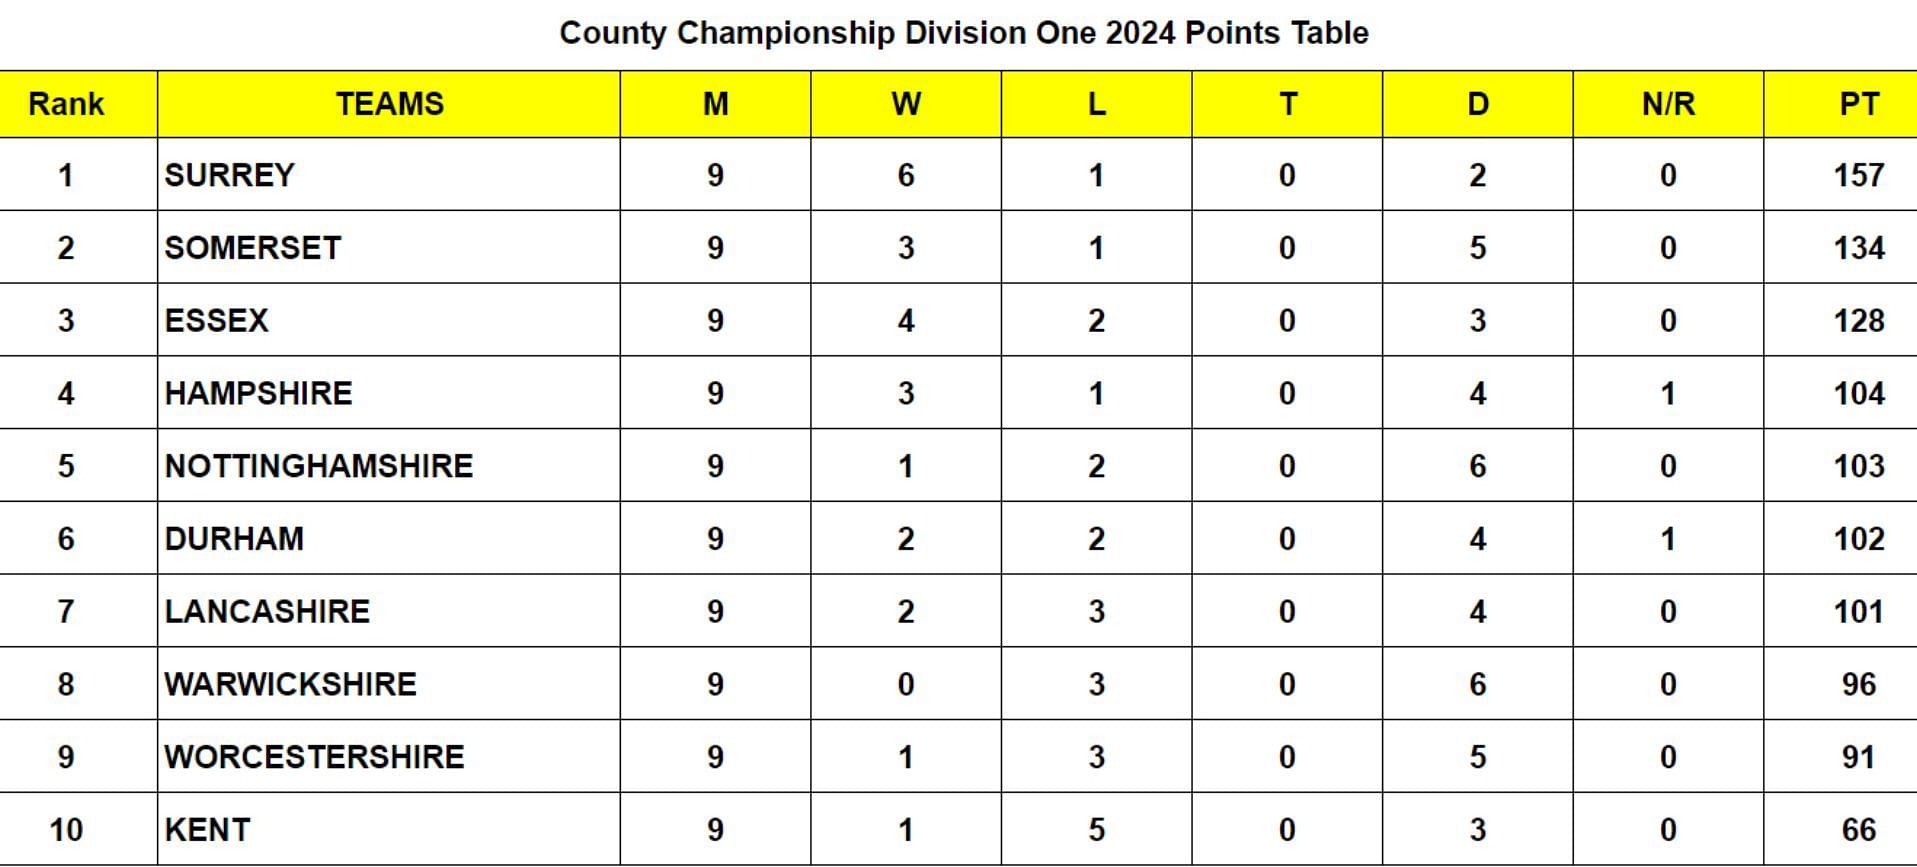 County Championship Division One 2024 Points Table: Updated standings after Surrey vs Essex, Match 45